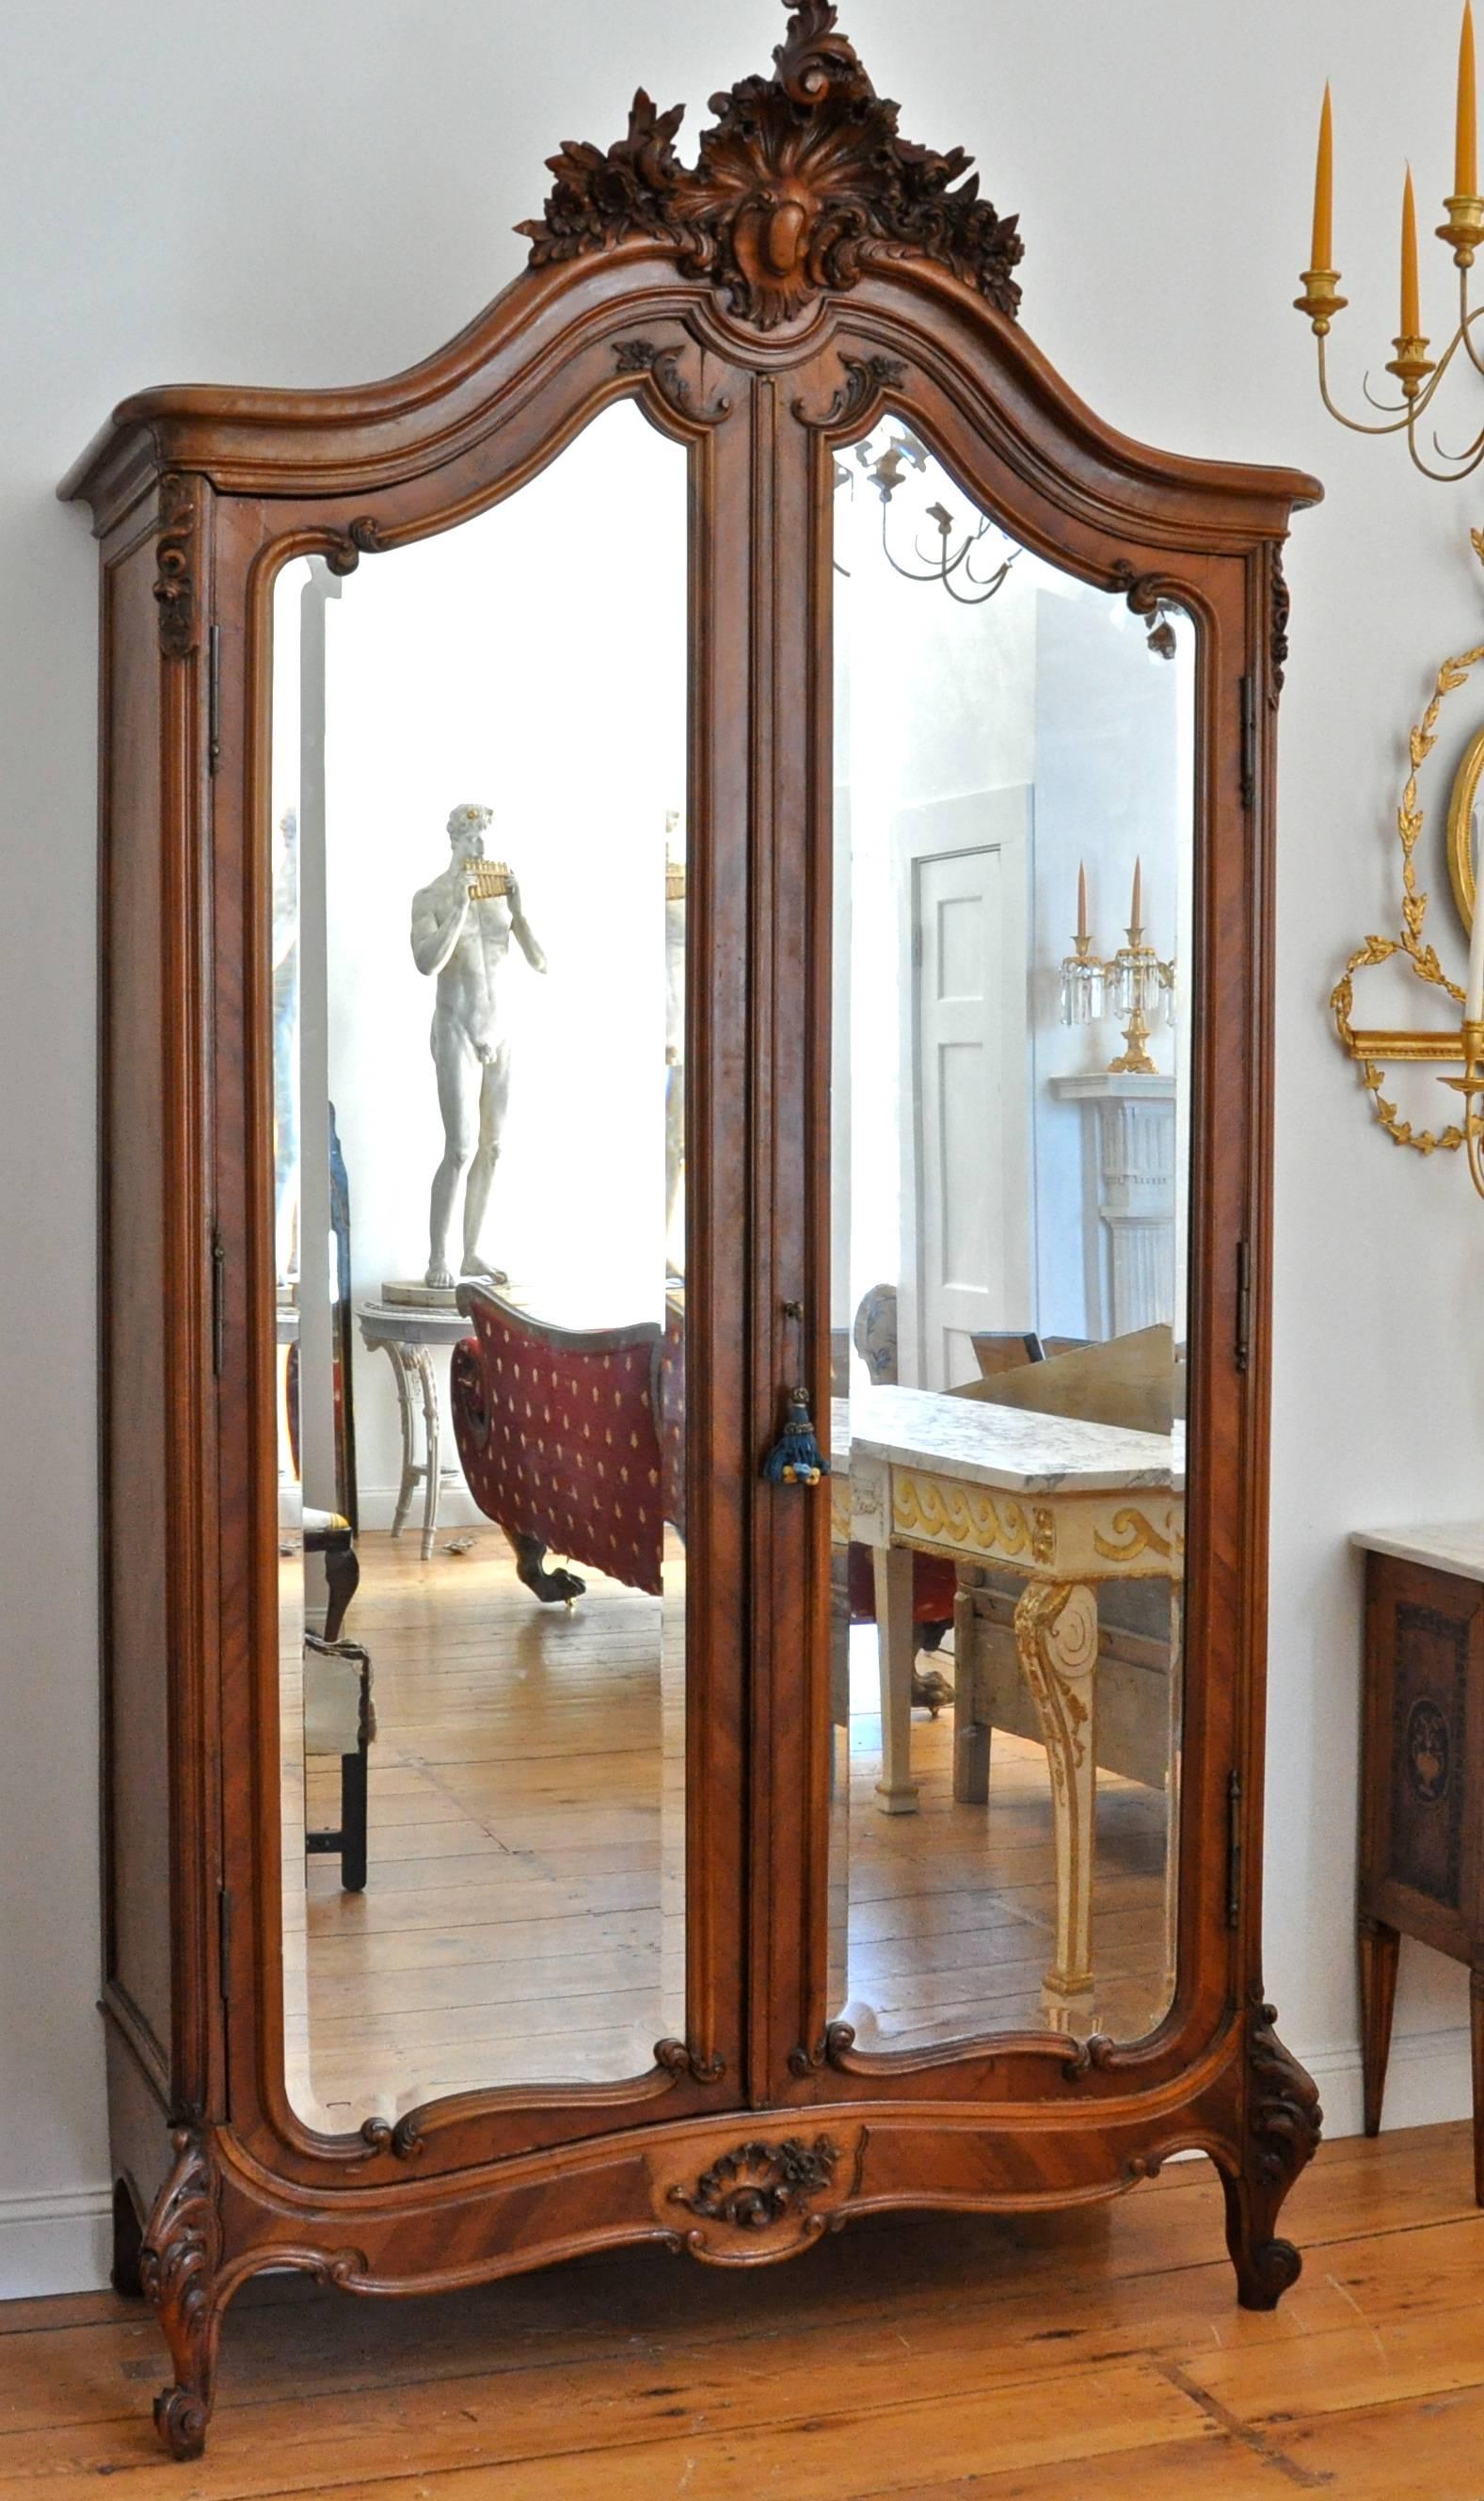 Walnut Louis XV style mirrored two-door armoire in walnut

Carved walnut cartouche with marquetry walnut veneers
Interior finished in bird's-eye maple
Disassembles for transport and installation into any interior space
Beautifully carved